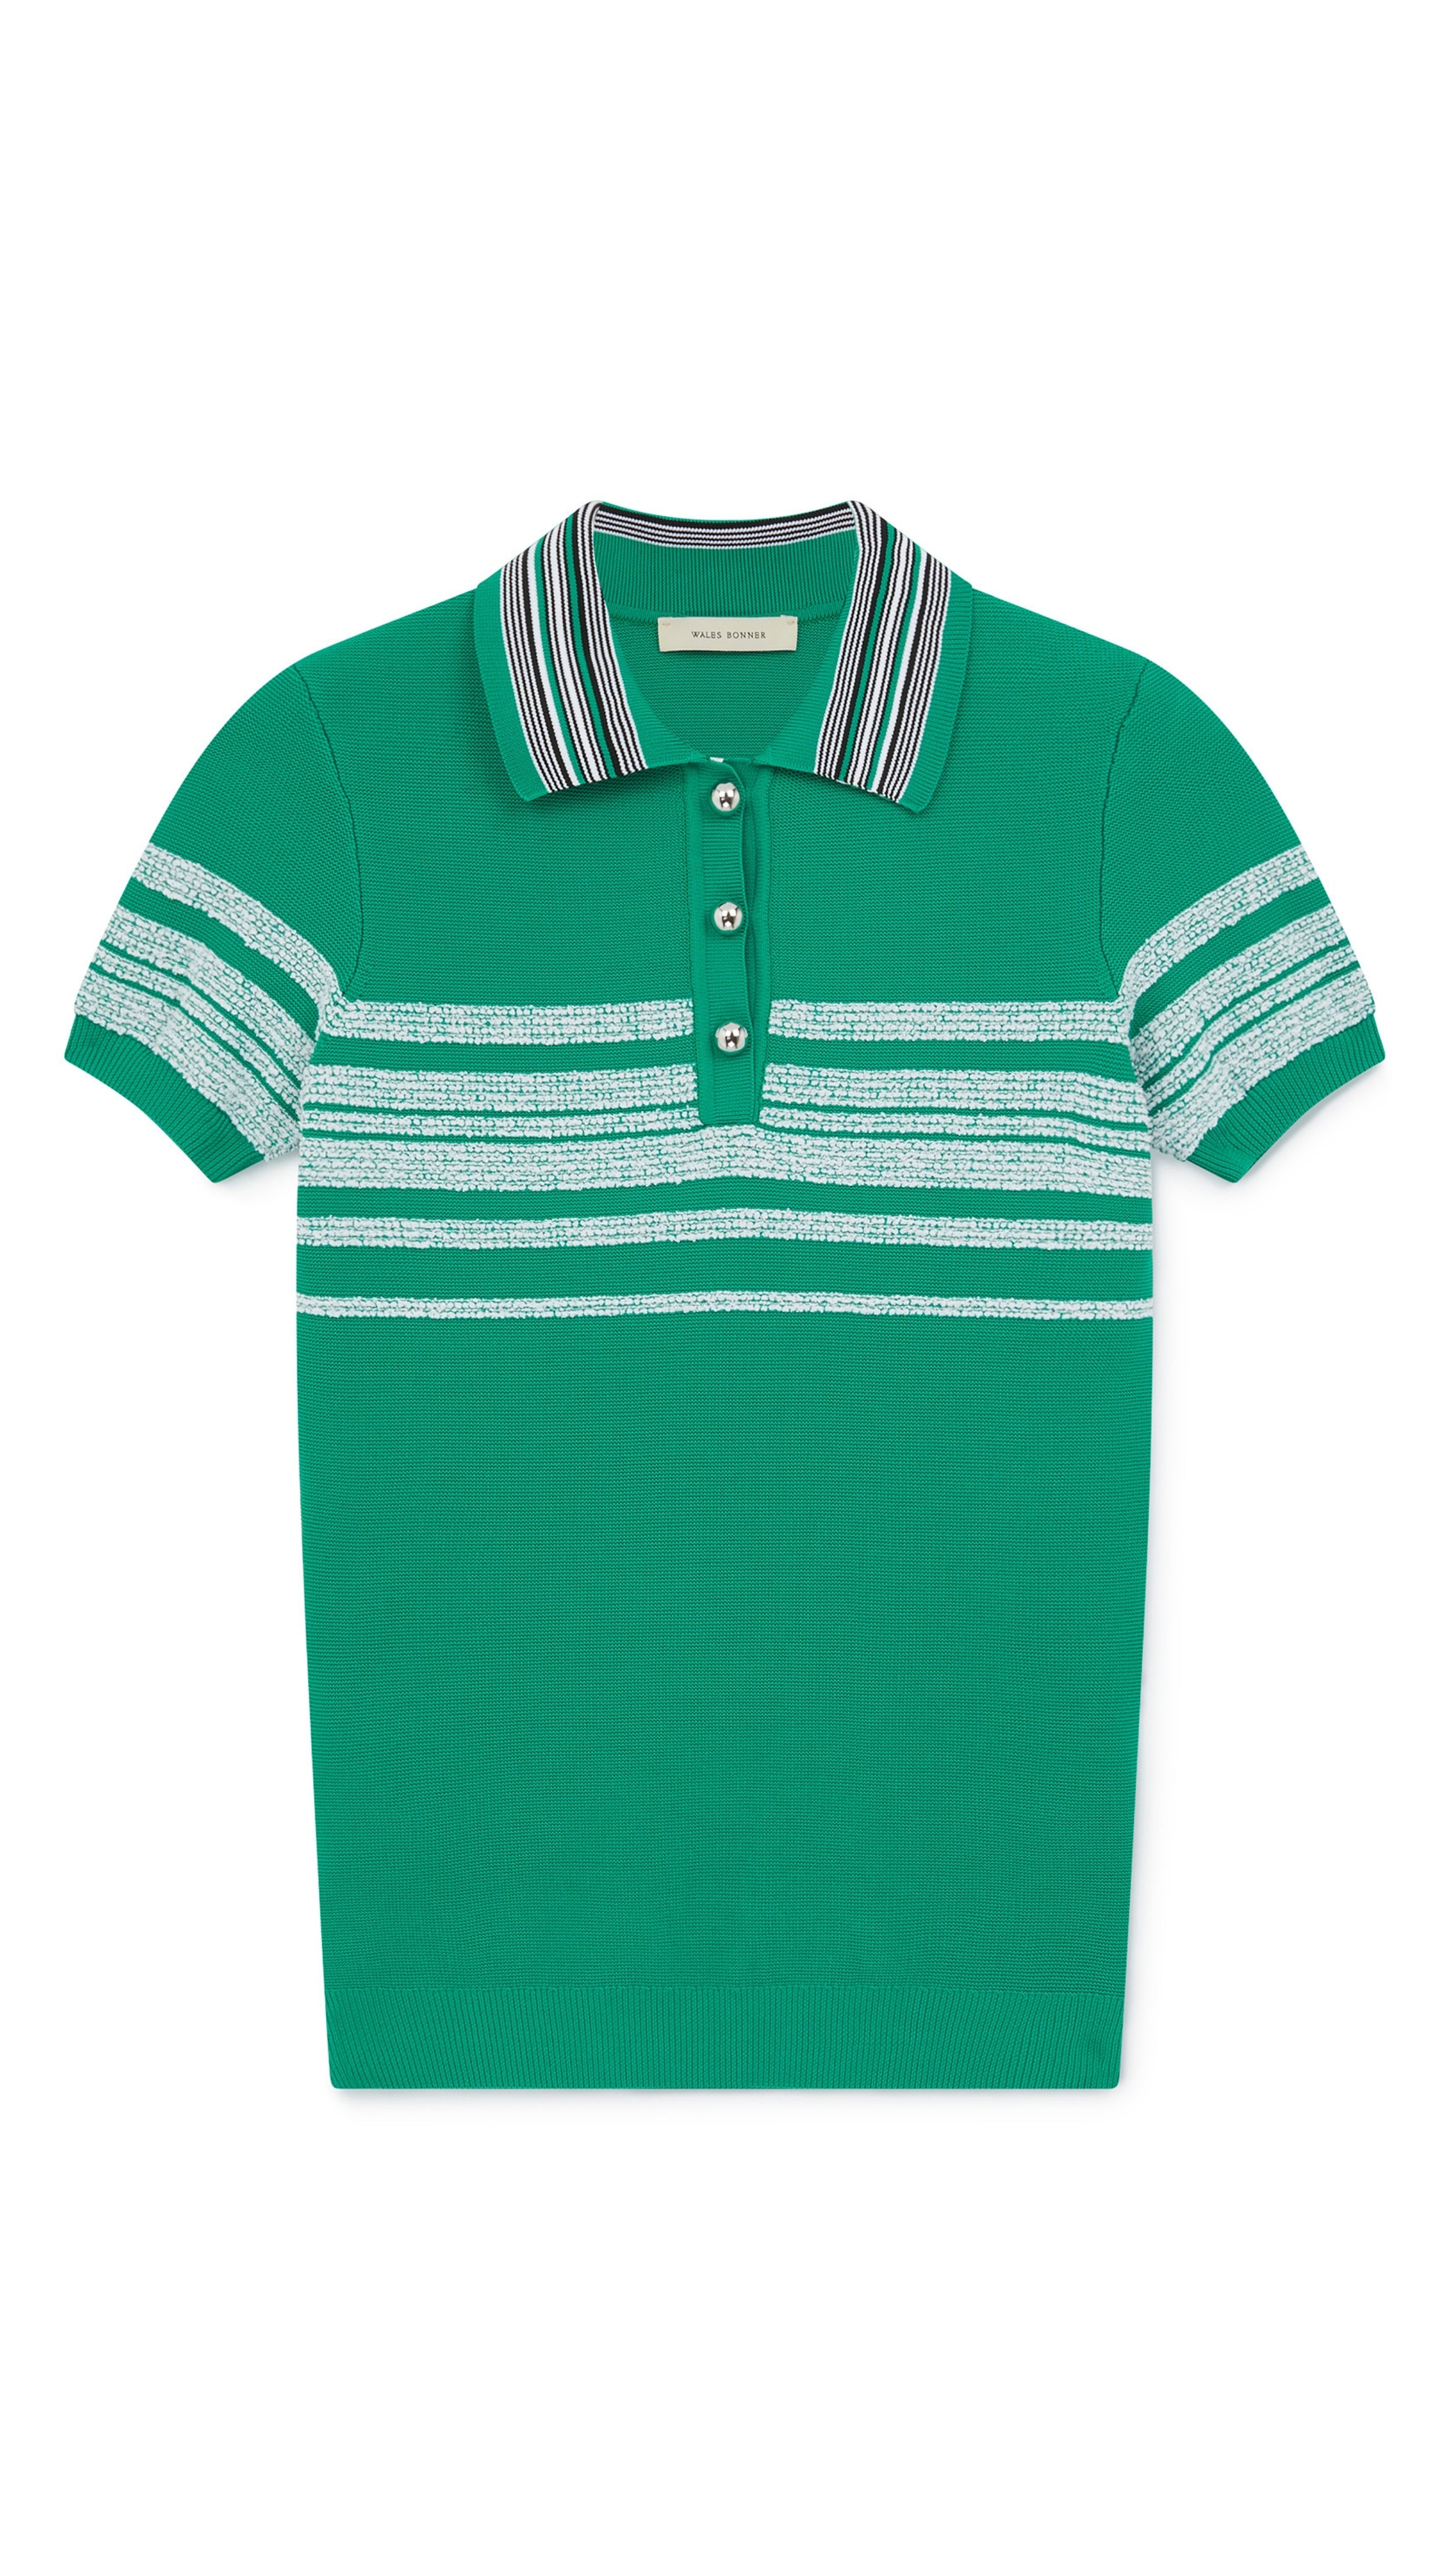 Wales Bonner Dawn Summer Knit Polo The Dawn Summer Knit Polo is a lightweight and breathable summer tee shirt. A classic polo-style design top with short sleeves and a black striped collar, it is decorated with a white striped pattern across the chest and sleeves. Product photo facing front